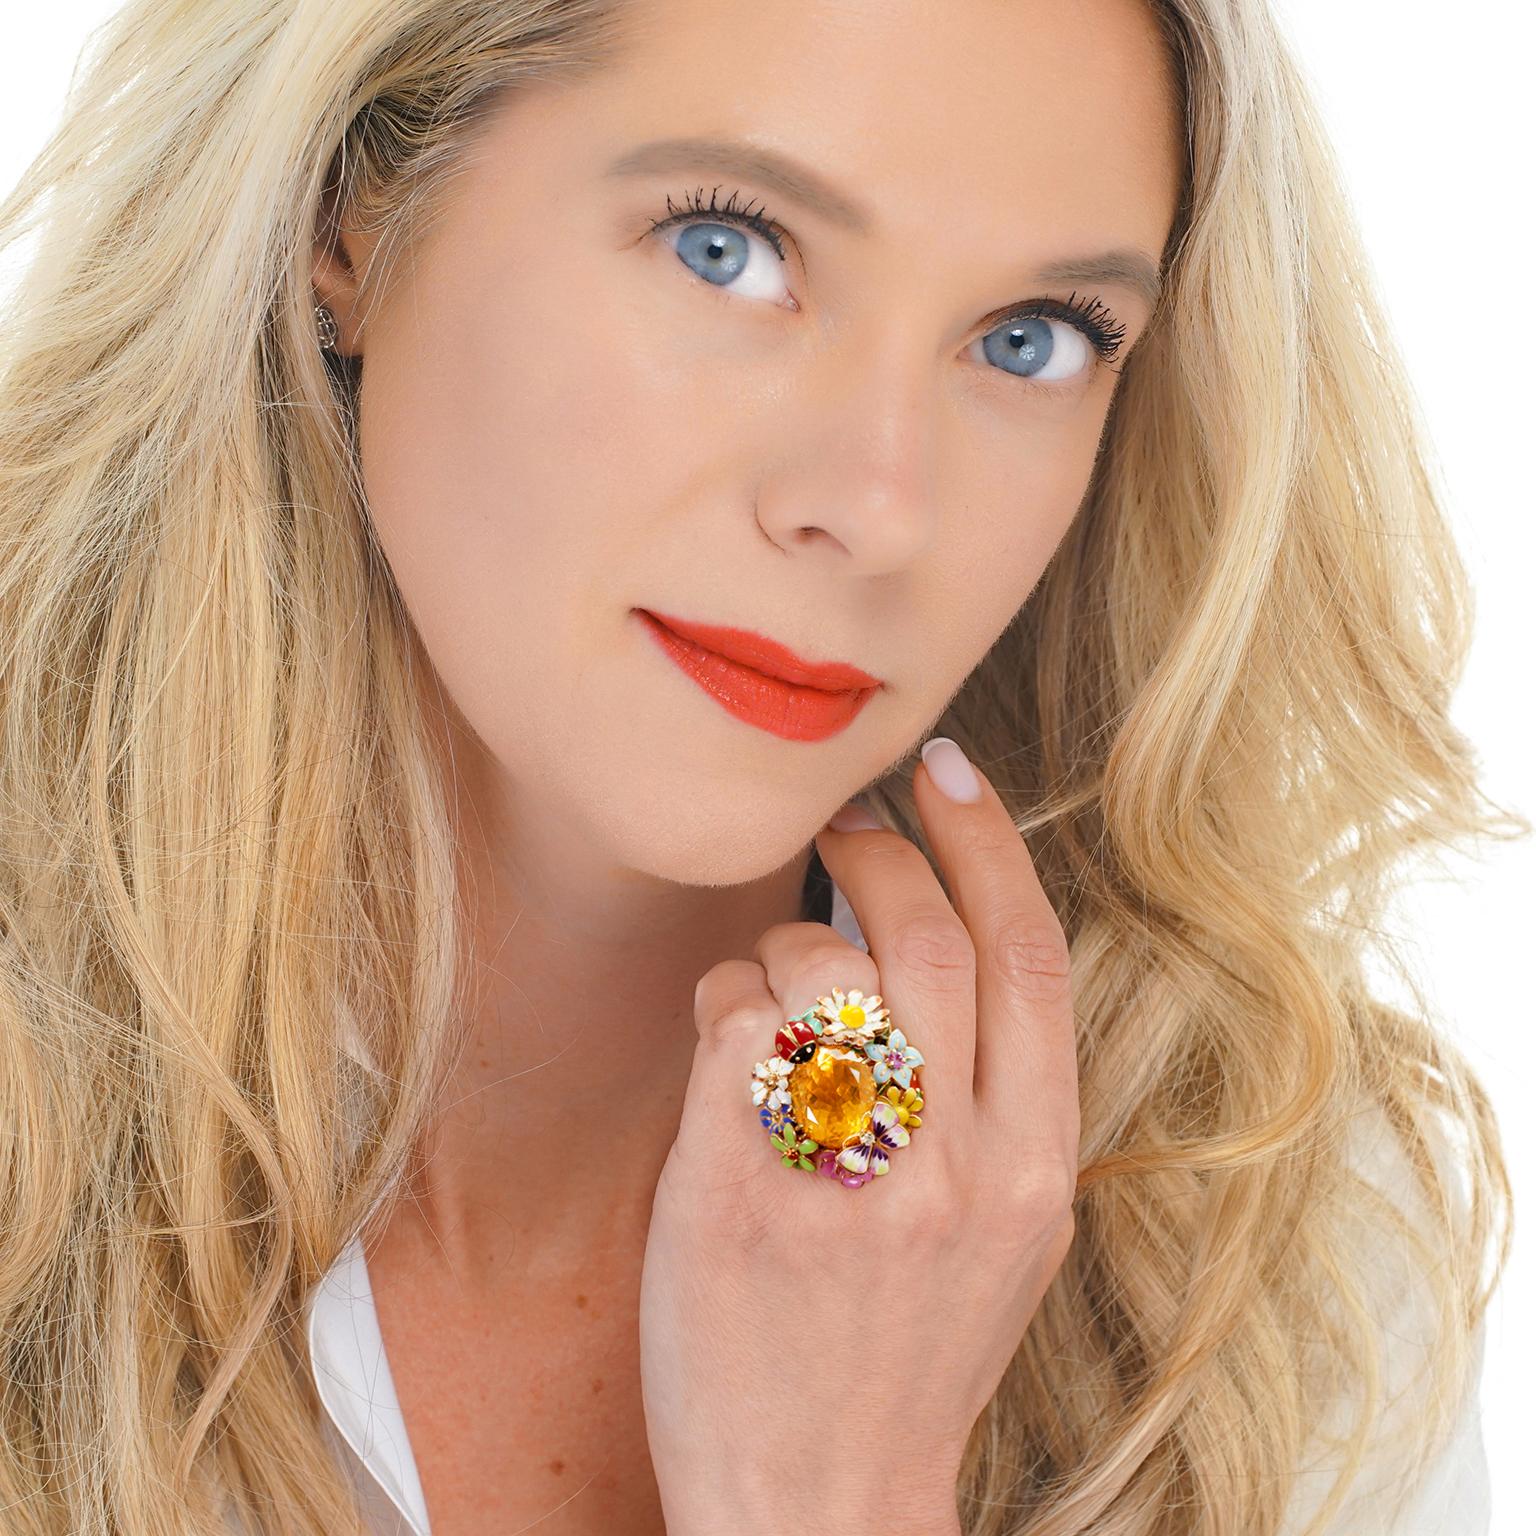 Circa 2006, 18k, by Victoire De Castellane for Dior, France. This Diorette ring is a spectacular garden of flowers in exquisite citrine, diamond, sapphire, amethyst, garnet, spessartite garnet and lacquer. The look is carefree Gallic charm at its